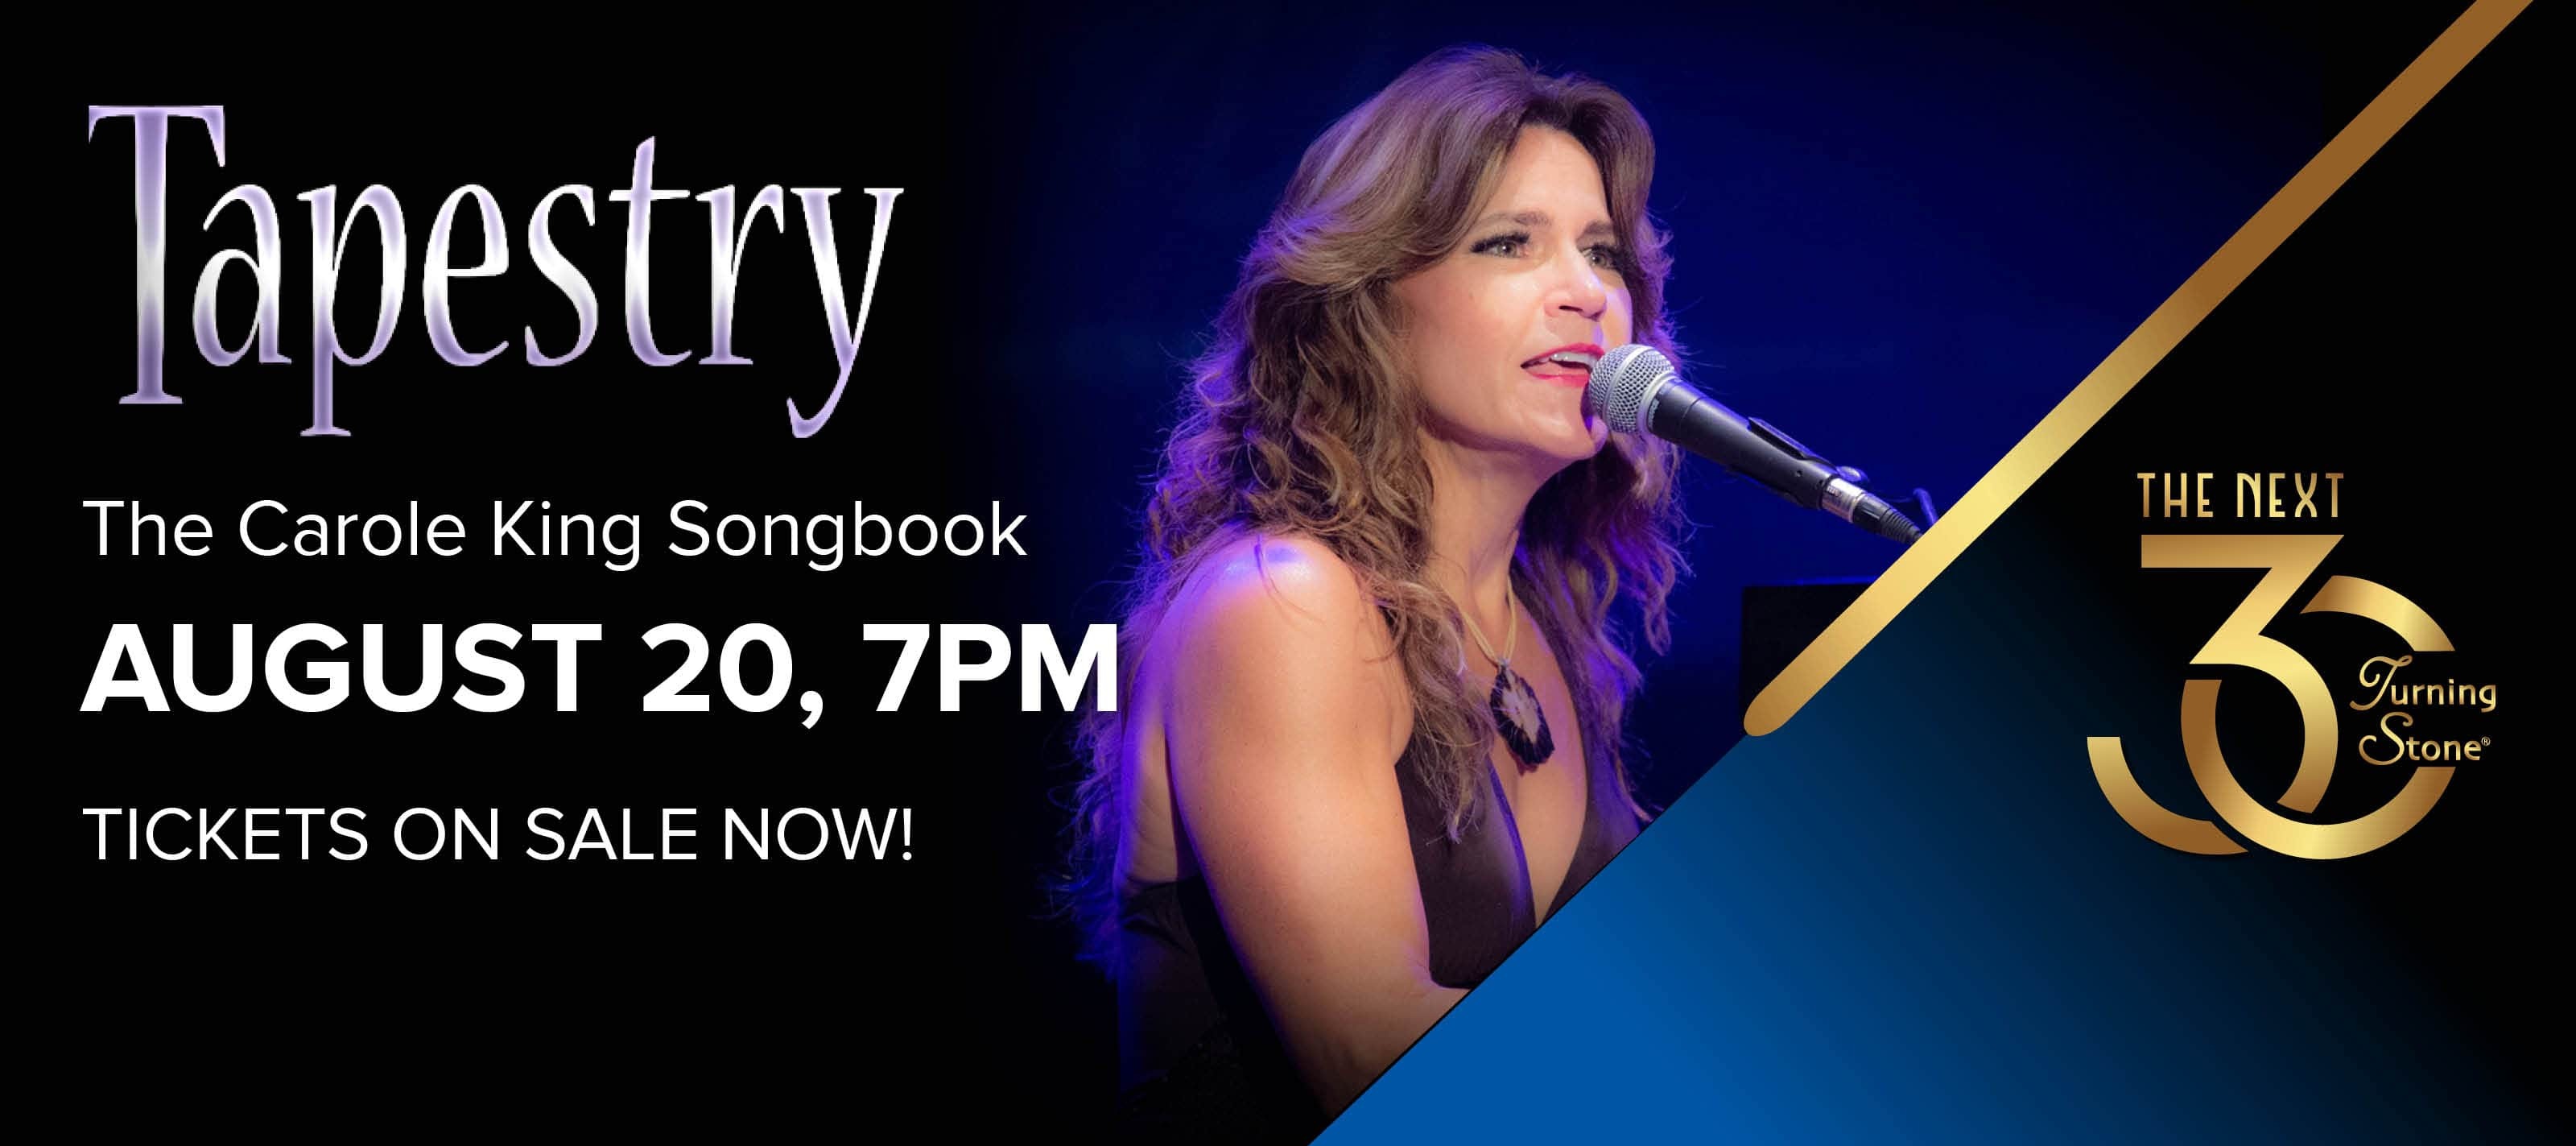 Tapestry The Carole King Songbook August 20 7pm Tickets On Sale Now